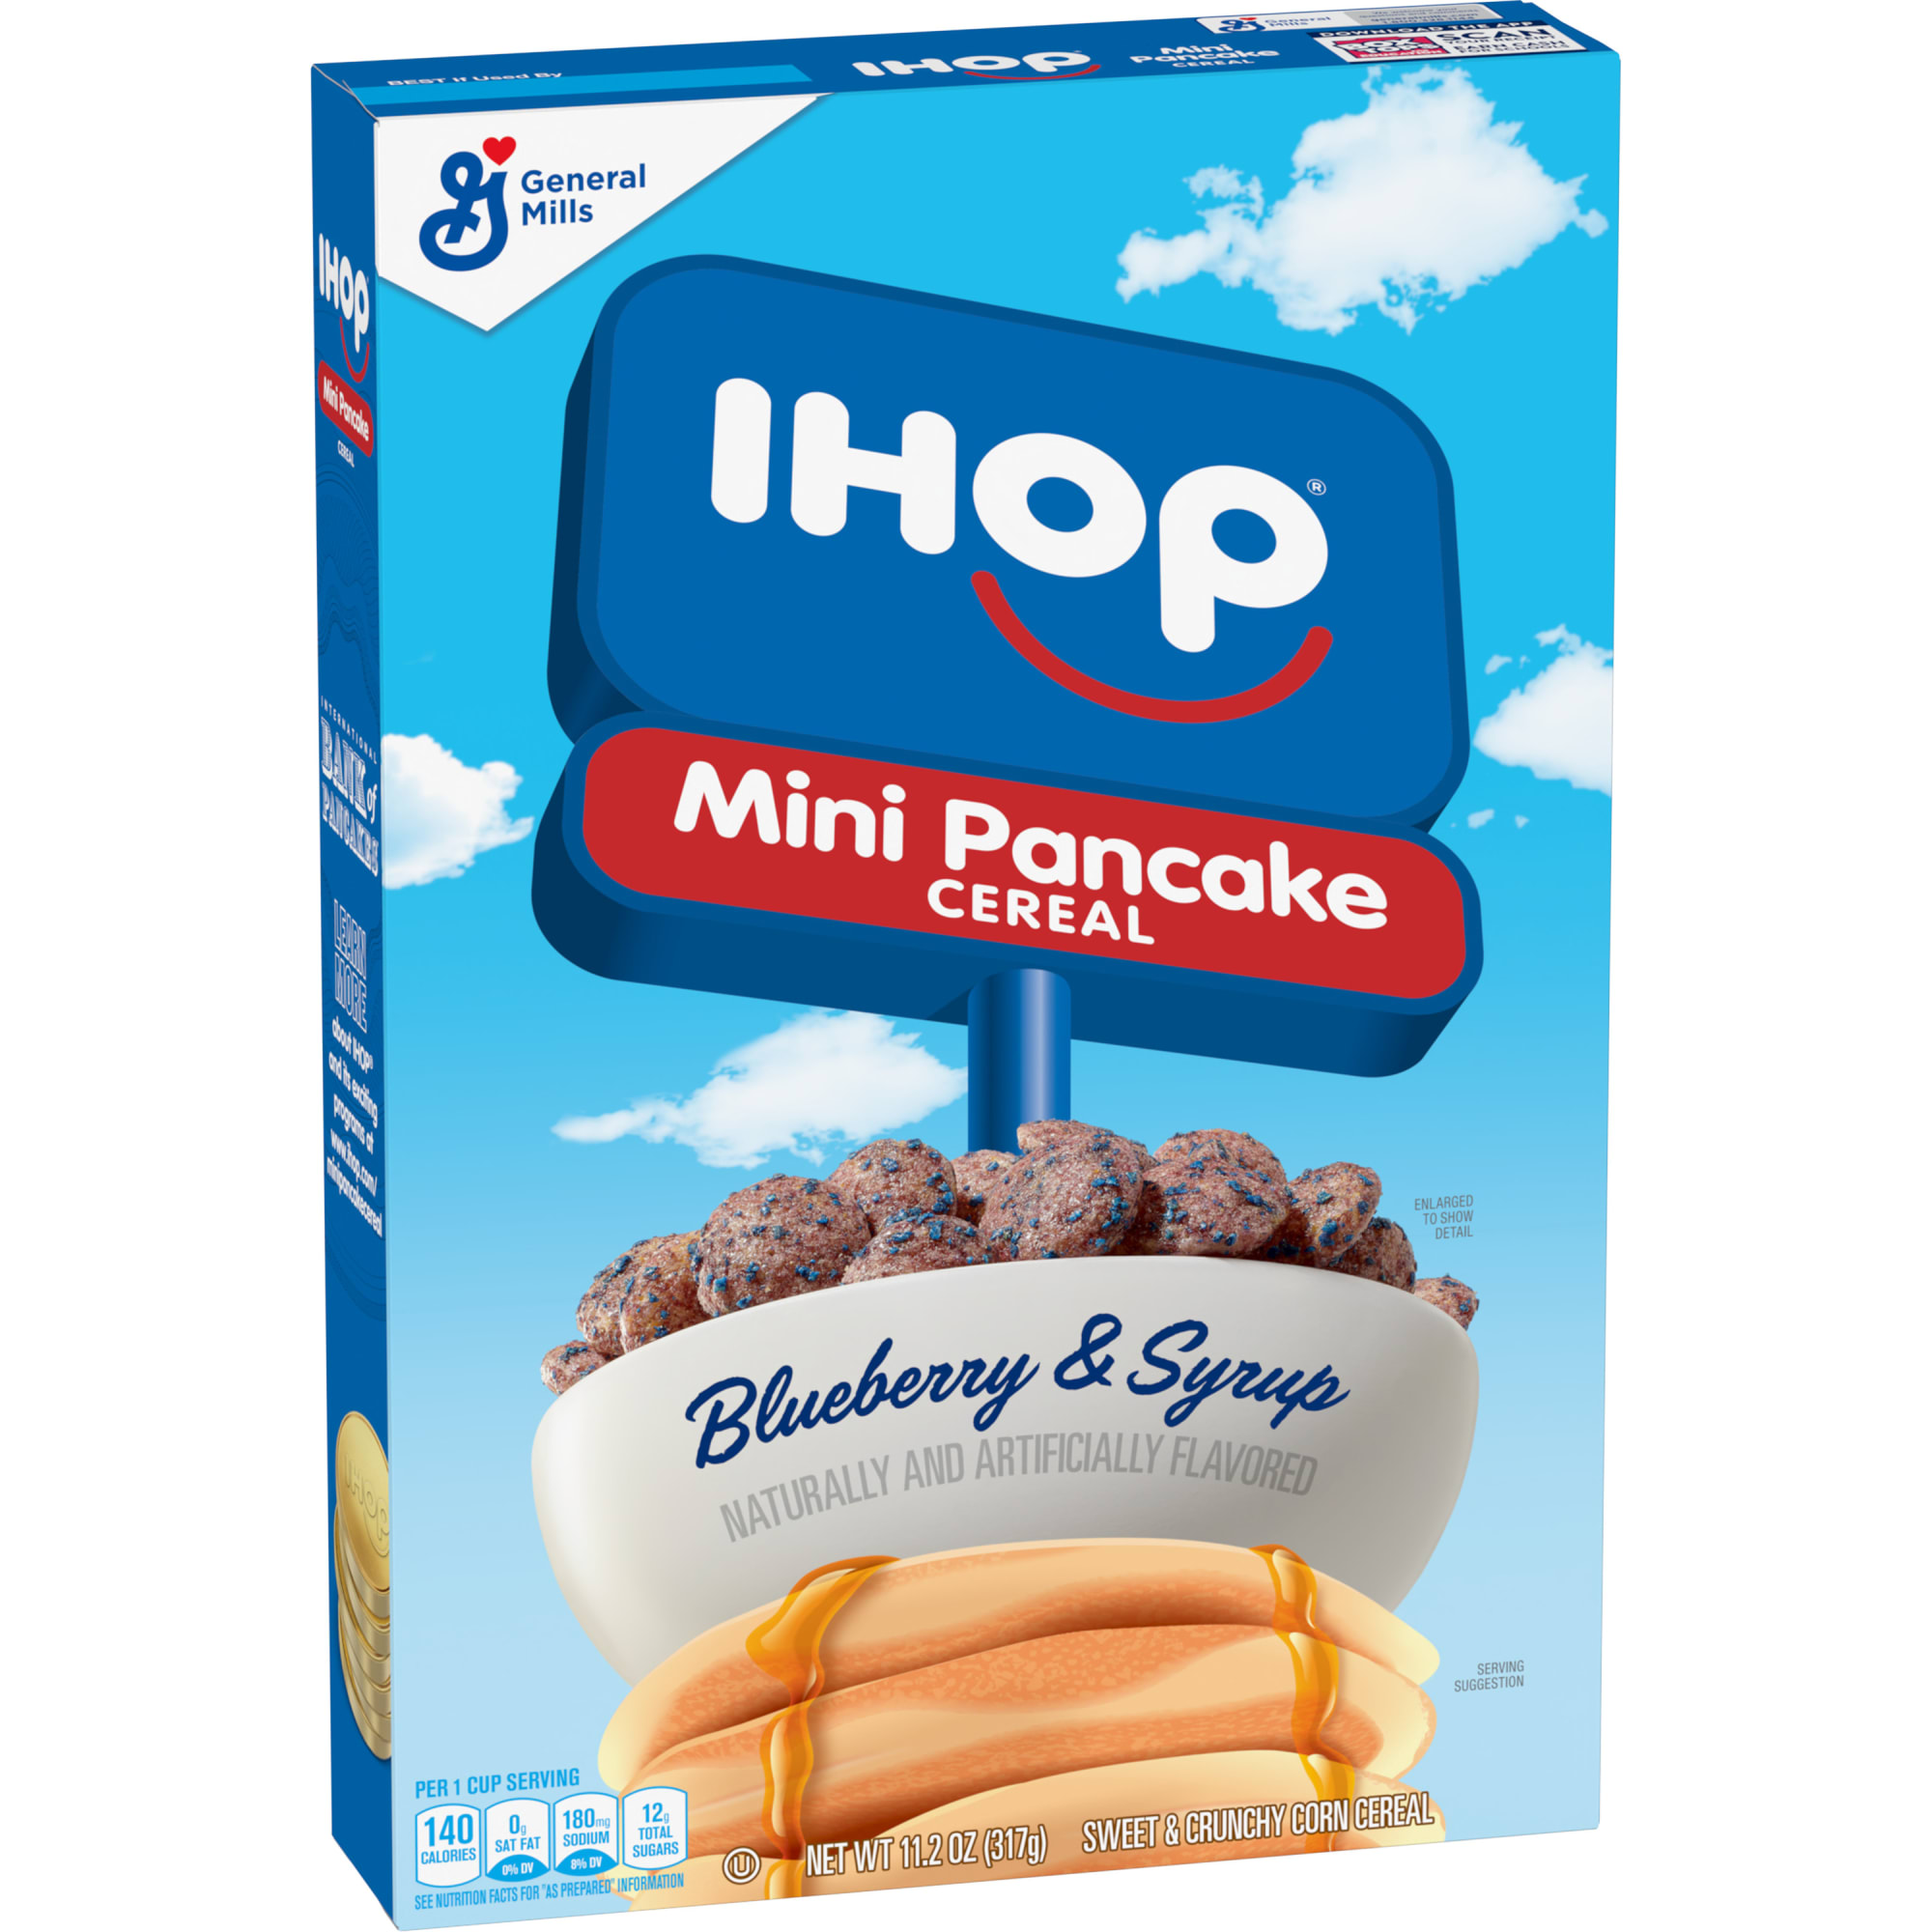 IHOP Mini Pancake Cereal makes the food trend convenient